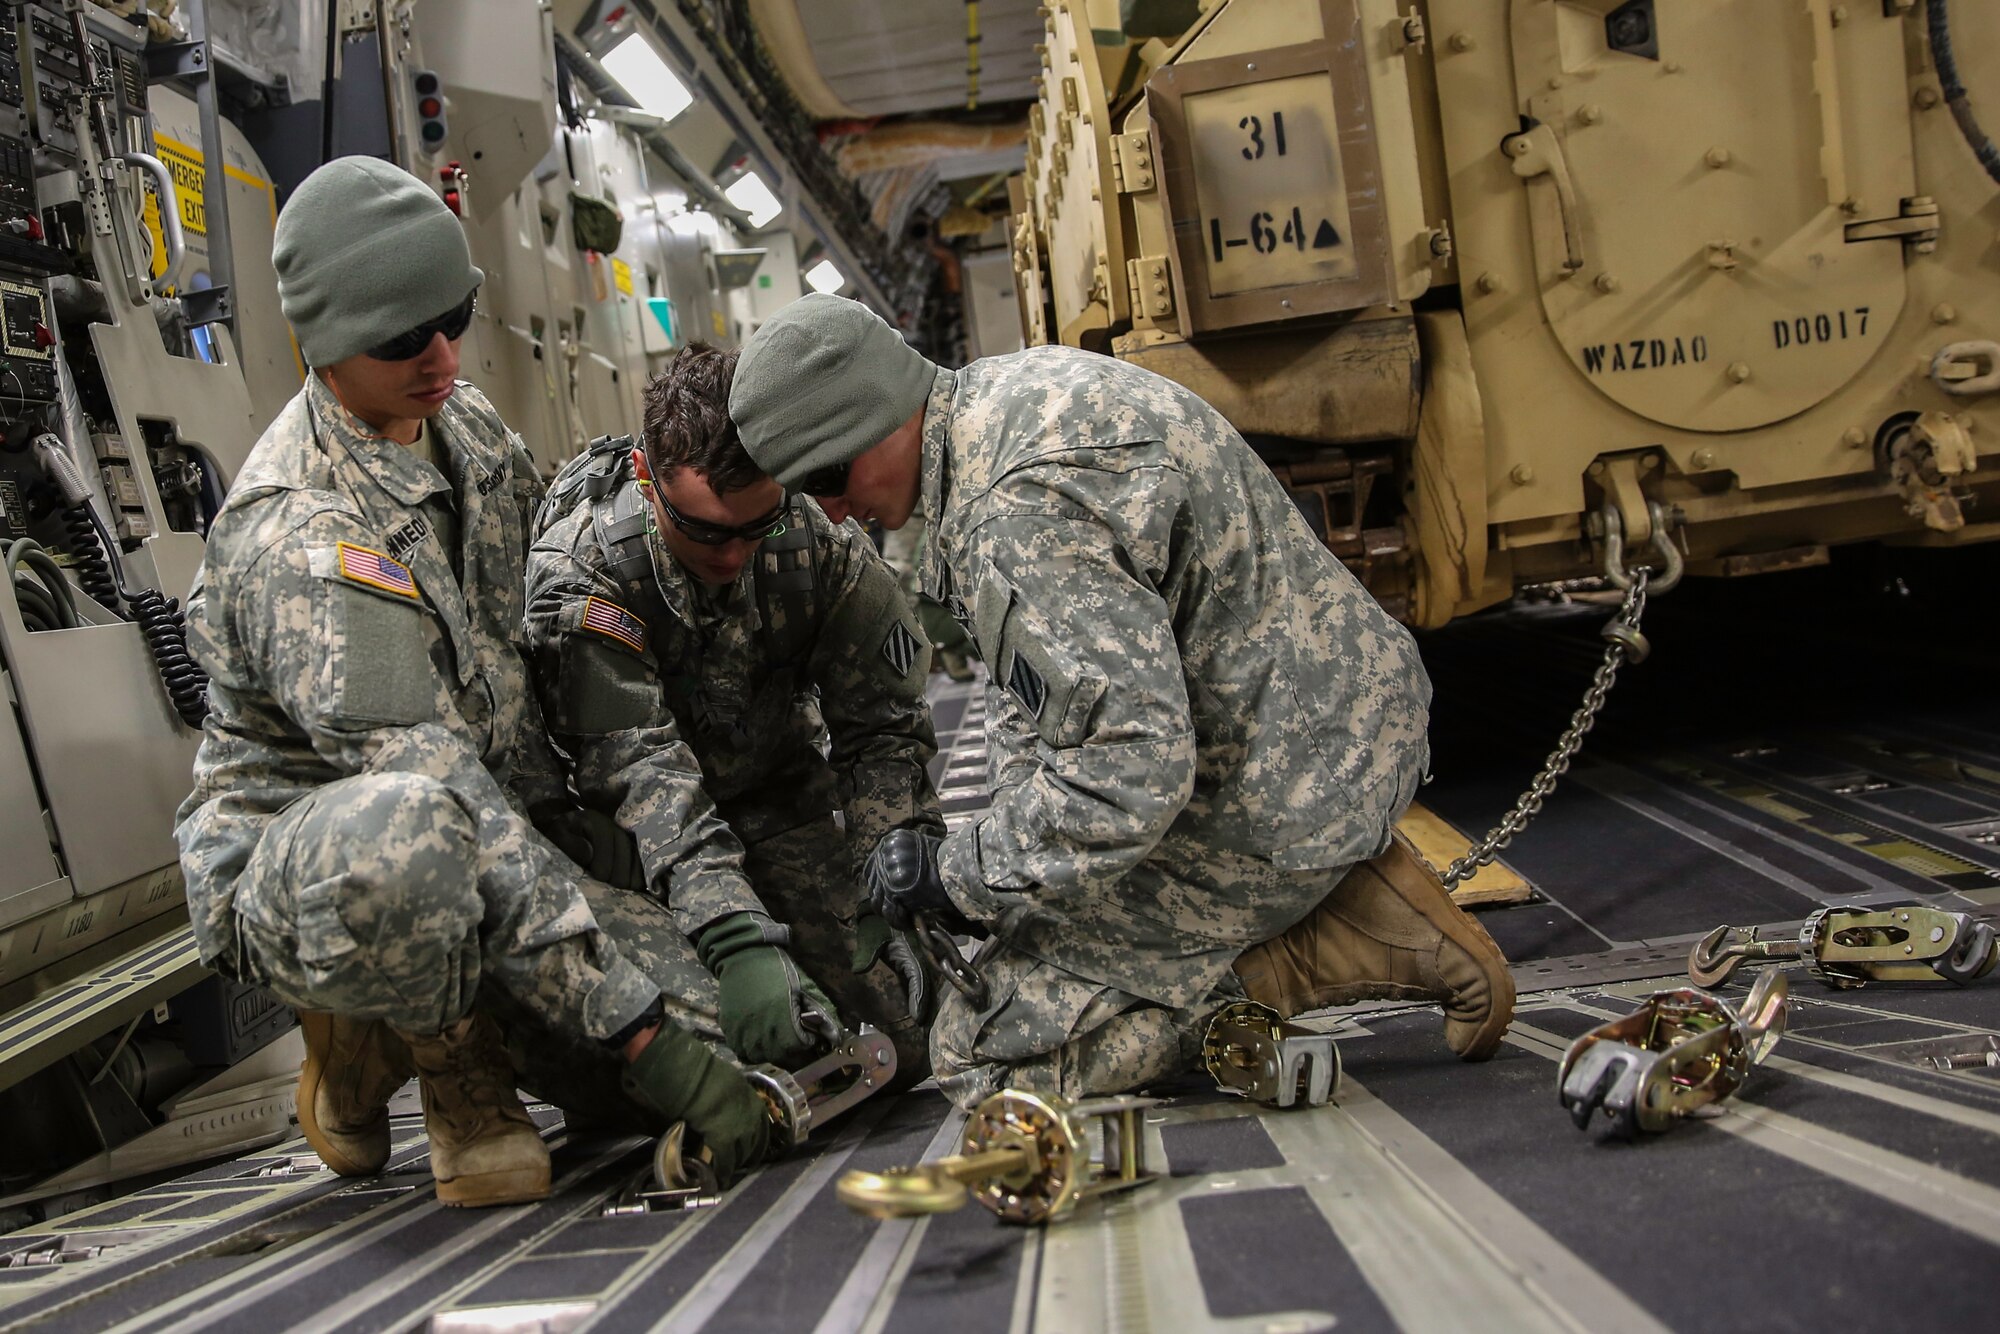 Soldiers from the U.S. Army’s 3rd Infantry Division stationed at Fort Stewart, Ga. attach a tie-down chain to secure an M2A3 Bradley Fighting Vehicles in a C-17 Globemaster III Dec. 11, 2014 at Hunter Army Airfield, Ga. The cargo movement was part of a two-day exercise which integrated C-17 air and ground crew training for 315th Airlift Wing Airmen stationed at Joint Base Charleston, S.C. as well as Soldiers from one of the 3rd Infantry Division’s Immediate Ready Companies who can deploy within 22 hours. Four C-17’s were used during the exercise to deploy and redeploy two Abrams M1A2 tanks, an M88 recovery vehicle and two M2A3 Bradley Fighting Vehicles. (U.S. Air Force photo by Tech. Sgt. Shane Ellis)